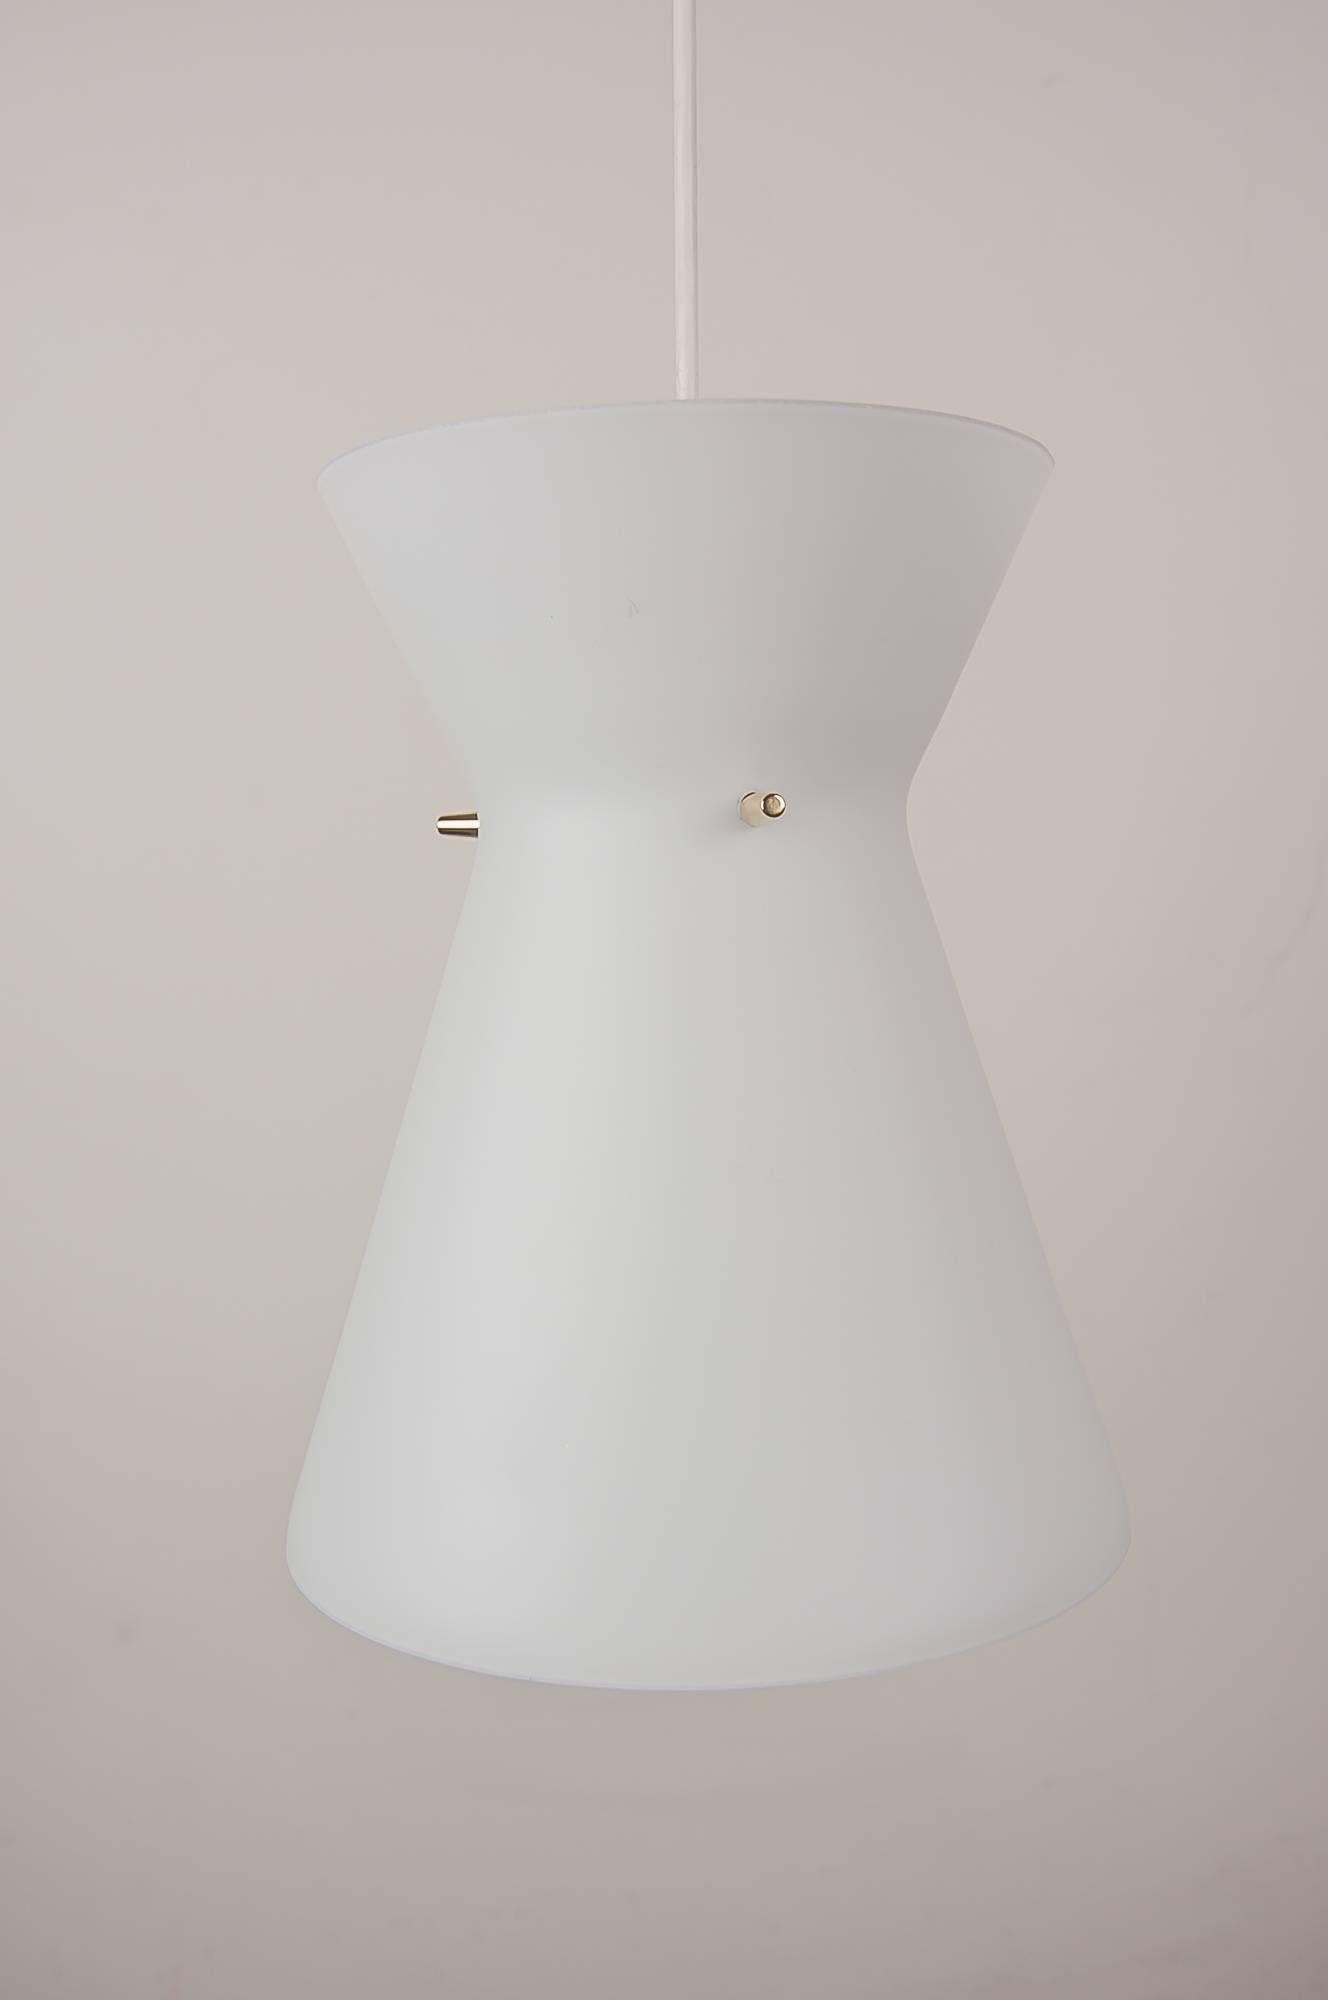 Pendant lamp with opal glass shade, Italian, 1960s
Original condition.
   